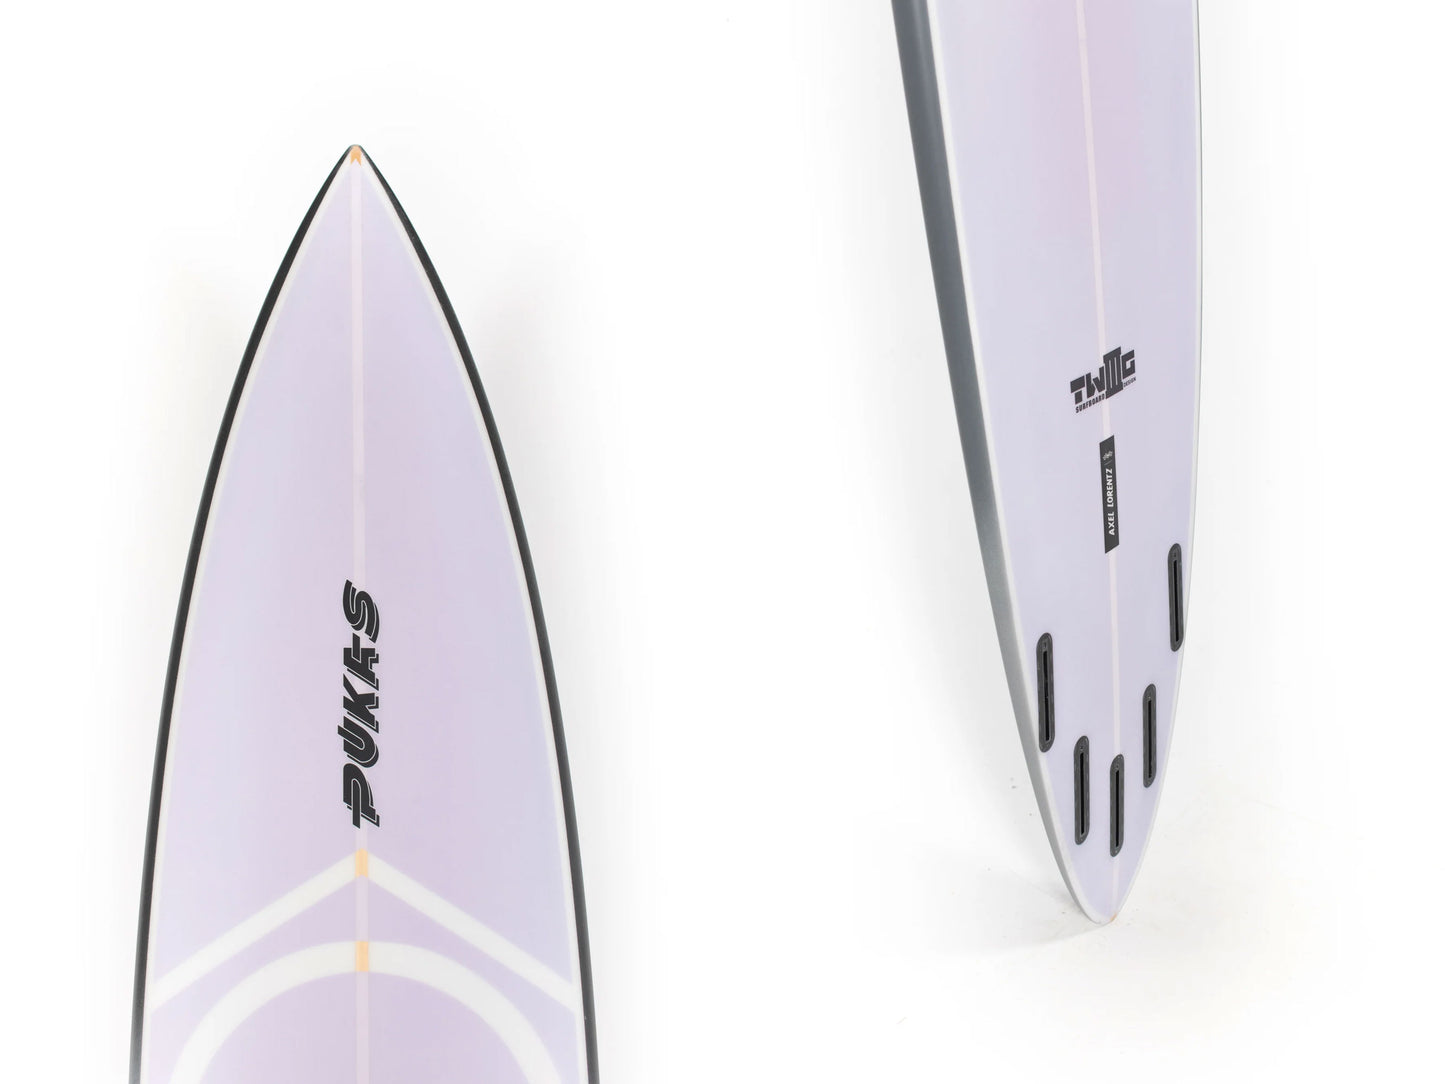 Pukas Surfboard - TWIG CHARGER by Axel Lorentz - 8´6” at PUKAS 